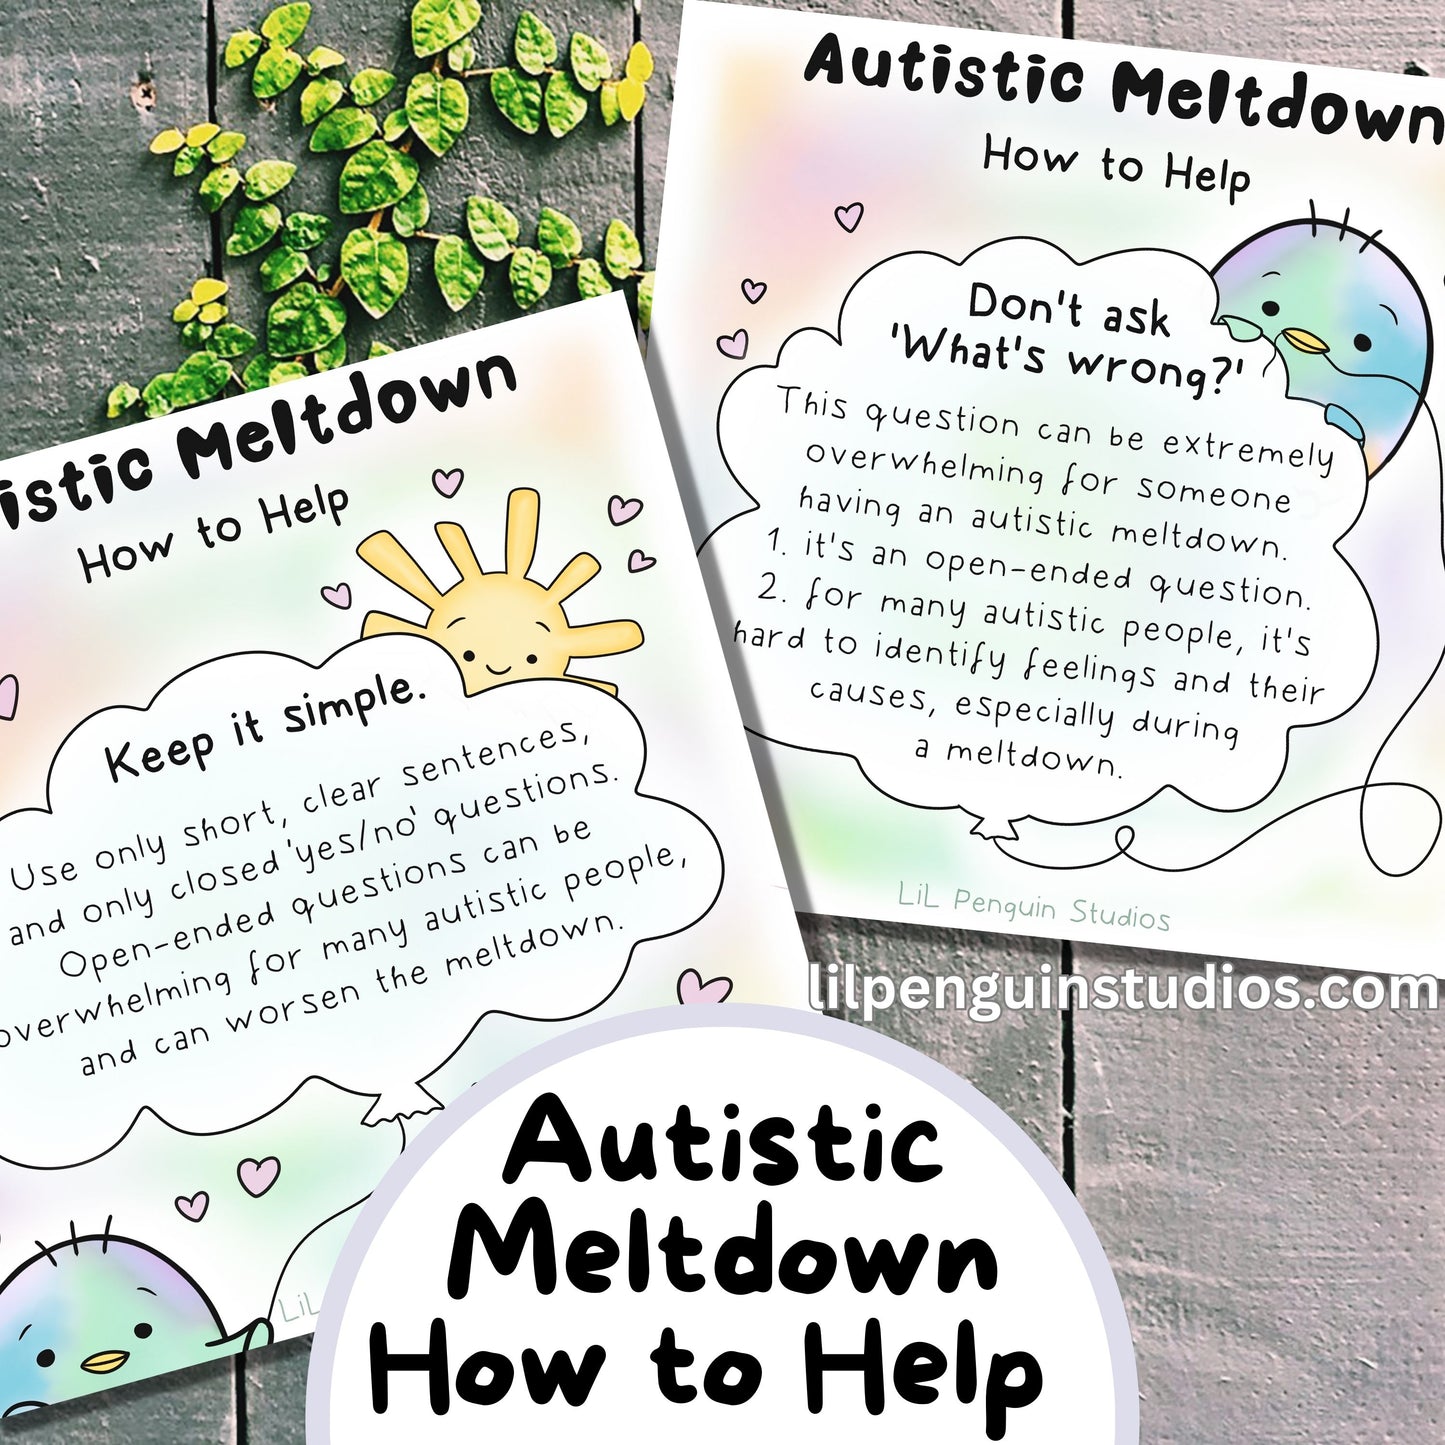 Autistic Meltdown, How to Help printable bundle with 2 worksheets.